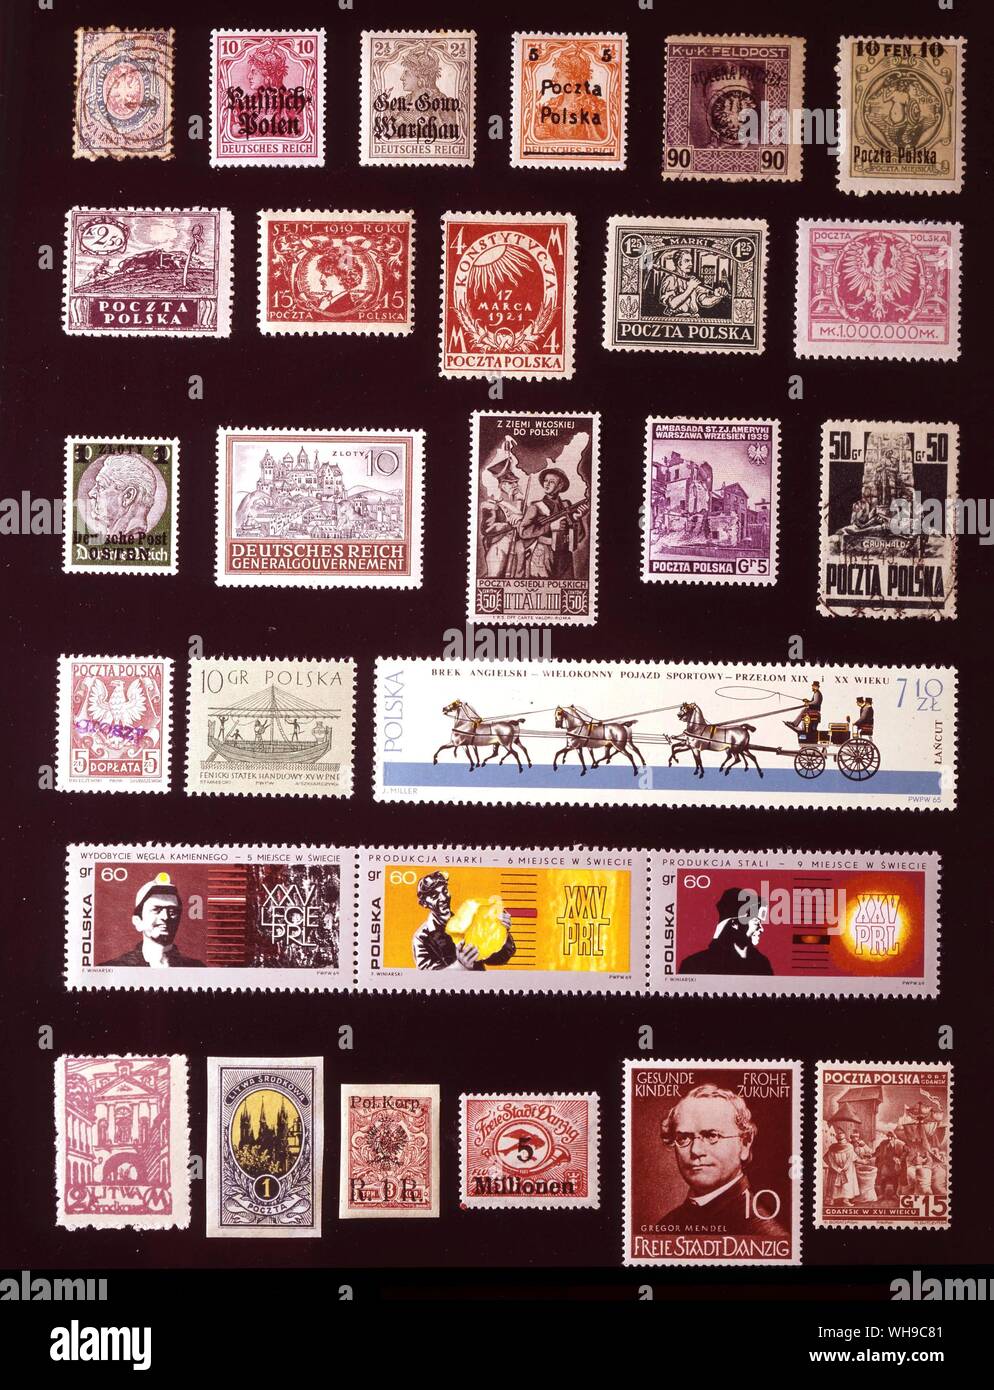 EUROPE - POLAND: (left to right) 1. 10 kopeks, 1860, 2. German occupation of Poland, 10 pfennigs, 1915, 3. General Government of Warsaw, 2.5 pfennigs, 1916, 4. Posen (Poznan) issue, 5 pfennigs, 1919, 5. Austrian Poland, 90 heller, 1919, 6. Provisional Government of Poland, 10 fenigi, 1918, 7. Poland, 2.50 korony, 1919, 8. 15 fenigi, 1919, 9. 4 marki, 1921, 10. 1.25 marki, 1921, 10. 1.25 marki, 1922, 11. 1,000,000 marki, 1924, 12. German Eastern Post, 1 zloty, 1939, 13. General Government, 10 zloty, 1920, 14. Polish Army in italy, 50centesimi, 1944, 15. London Government-in-Exile, 5 grosy, Stock Photo